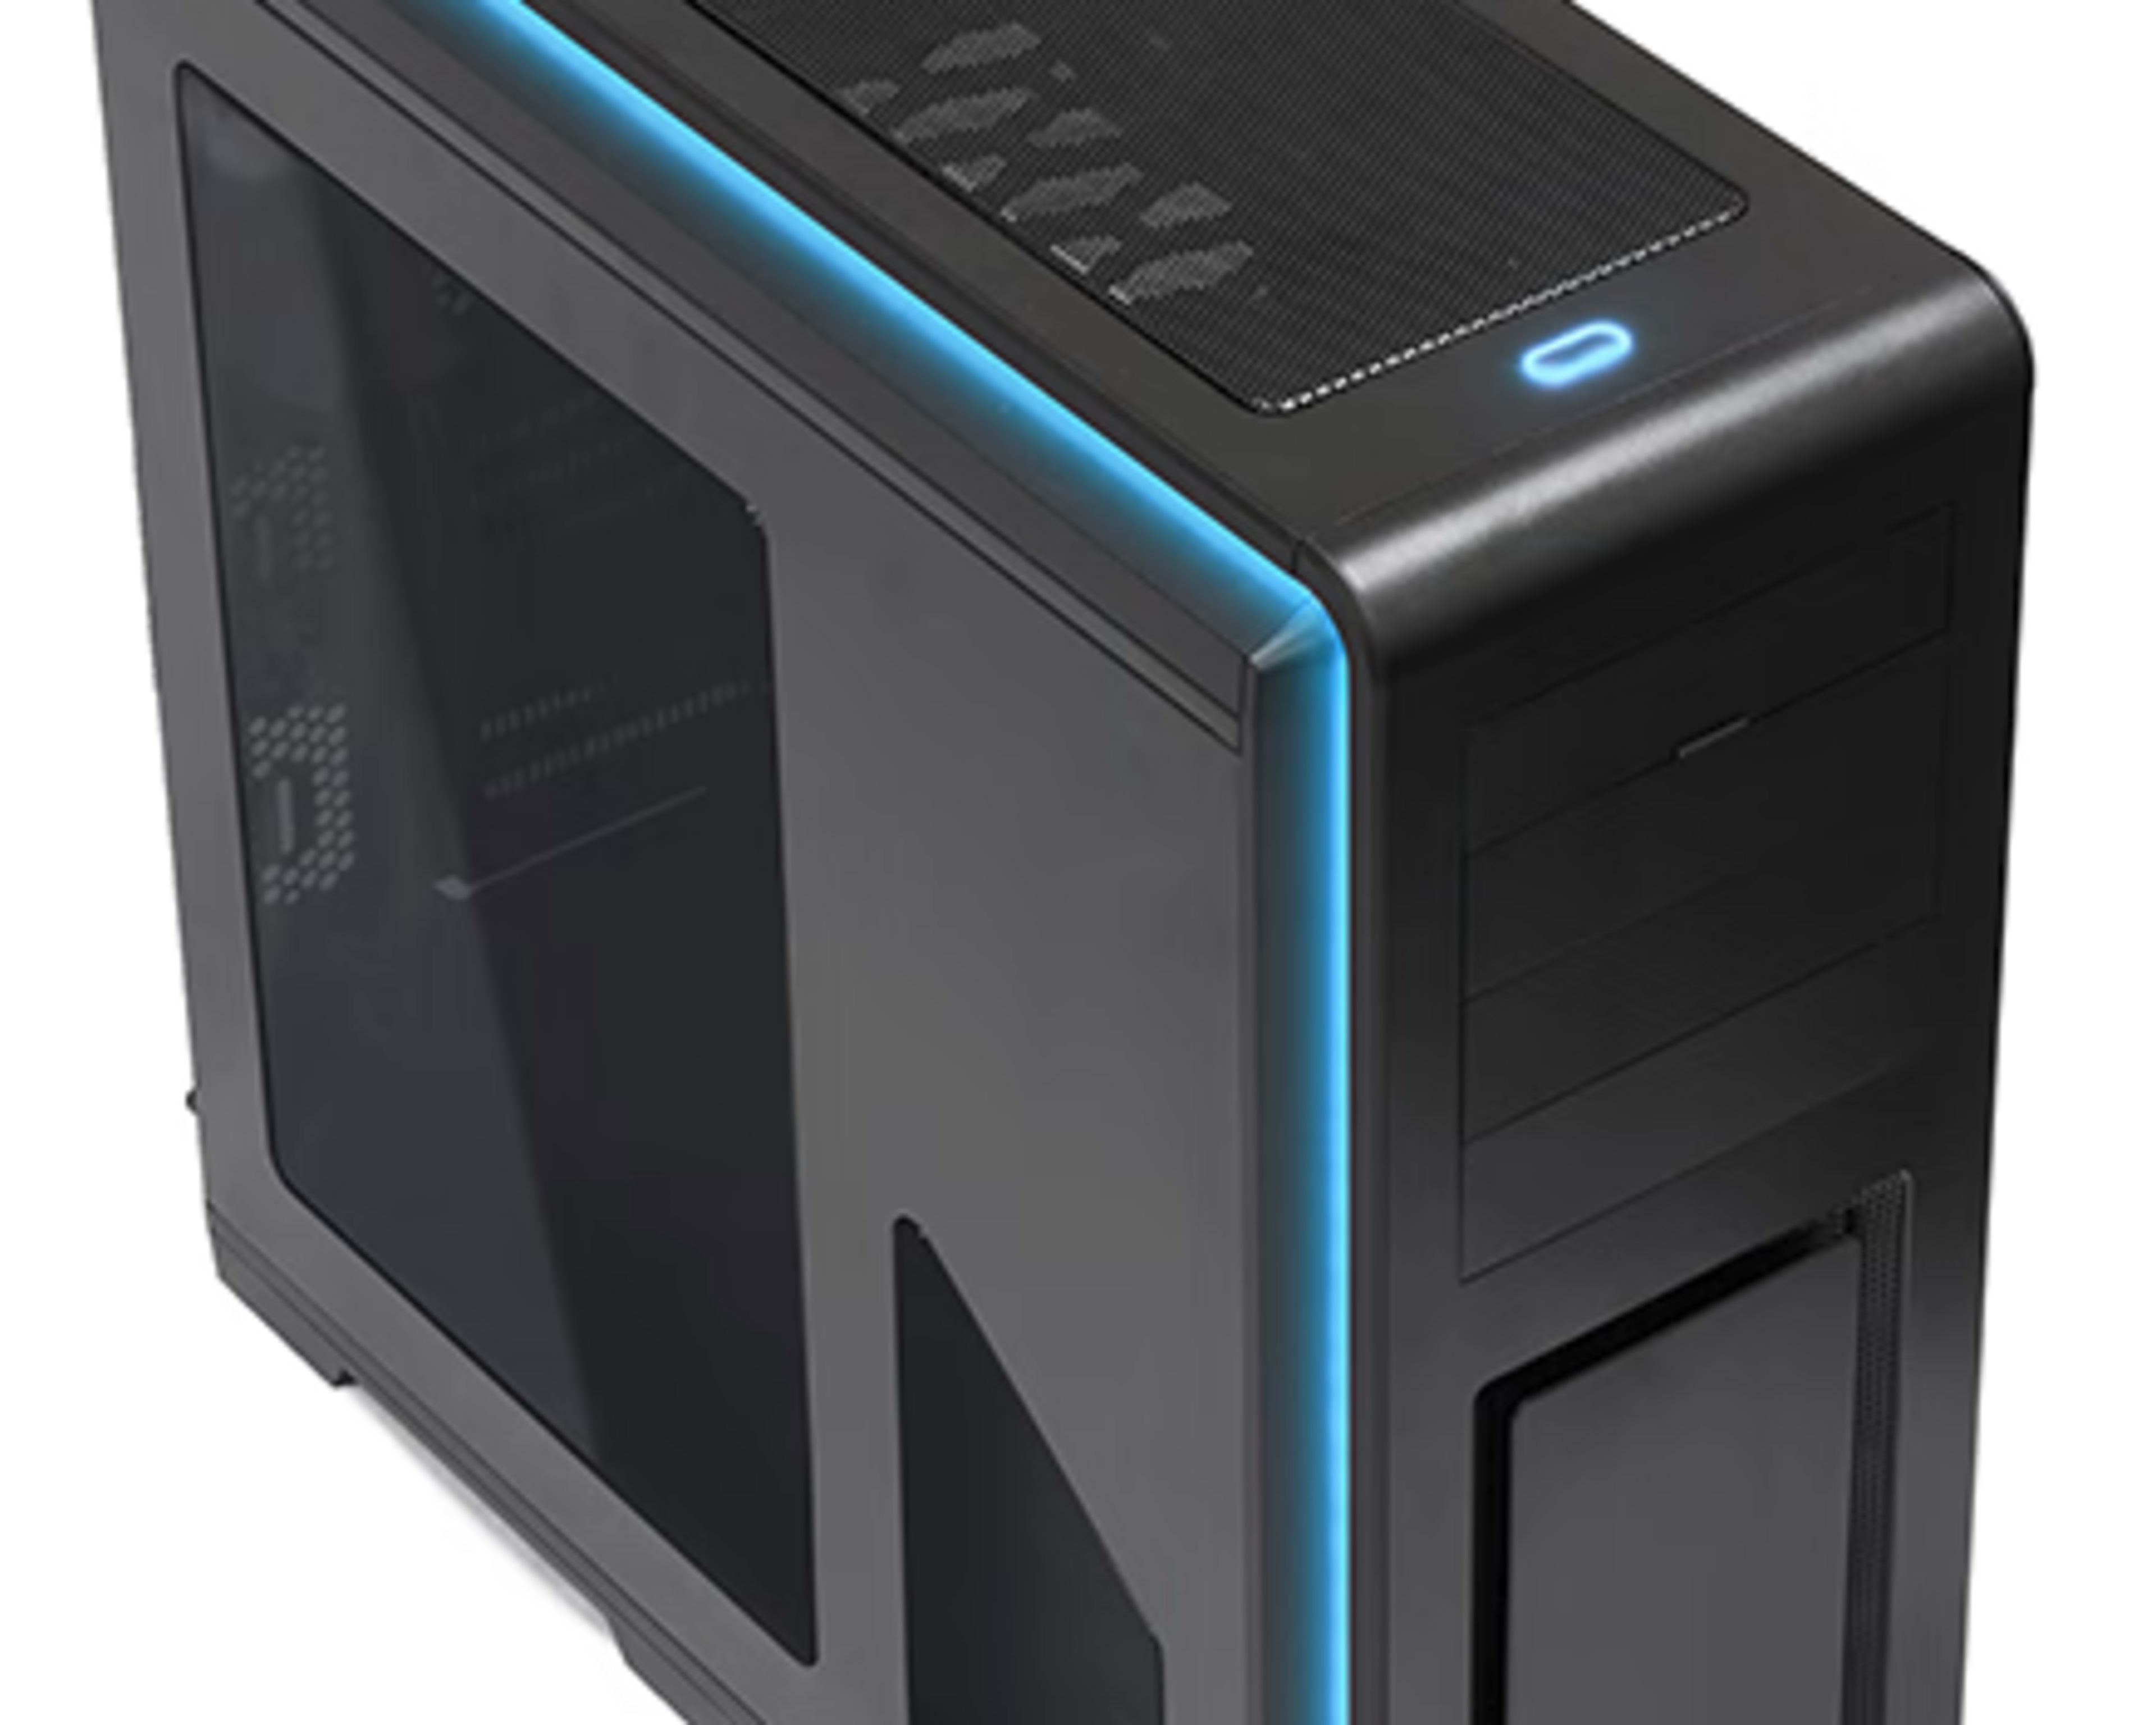 Phanteks Enthoo Luxe full tower computer case in original retail box with all parts and accessories